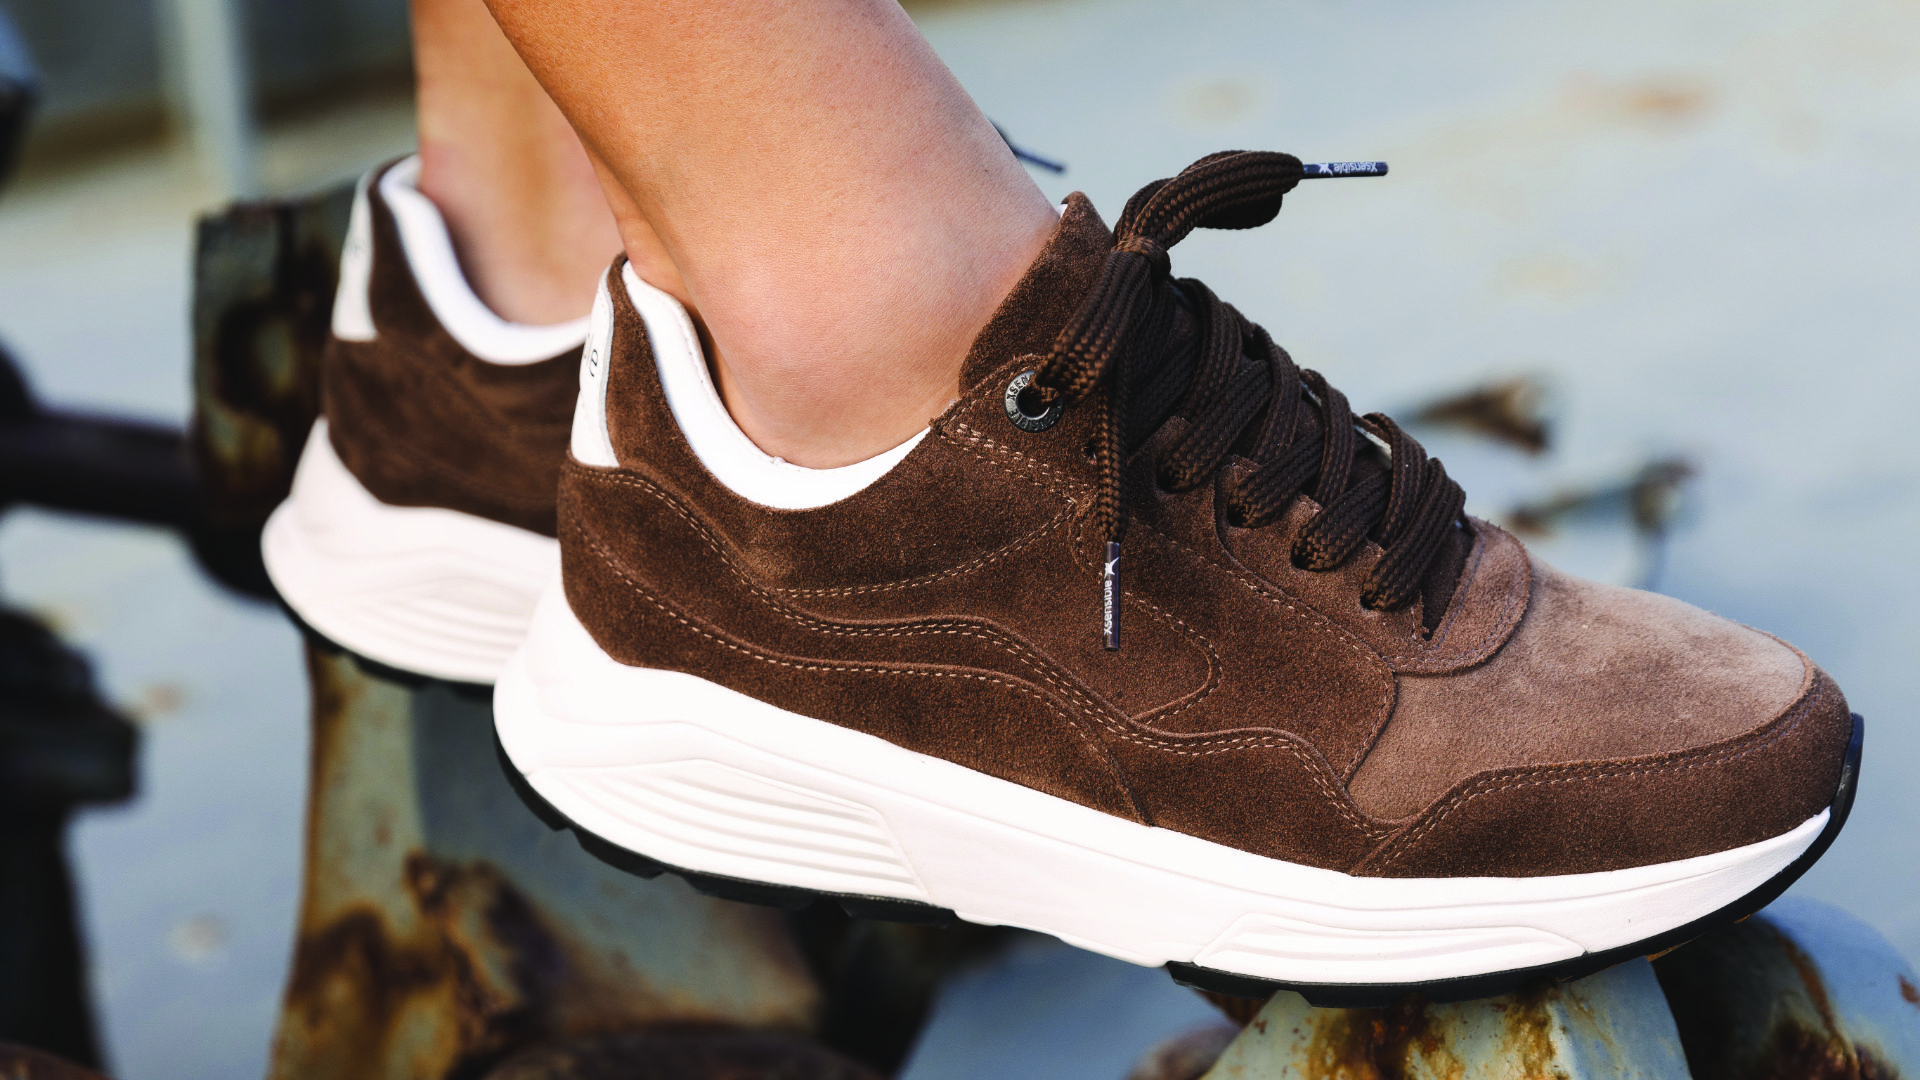 A pair of Xsensible Golden Gates shoes in brown suede, with a close-up view showcasing the unique stretch upper and support that can provide pain relief.